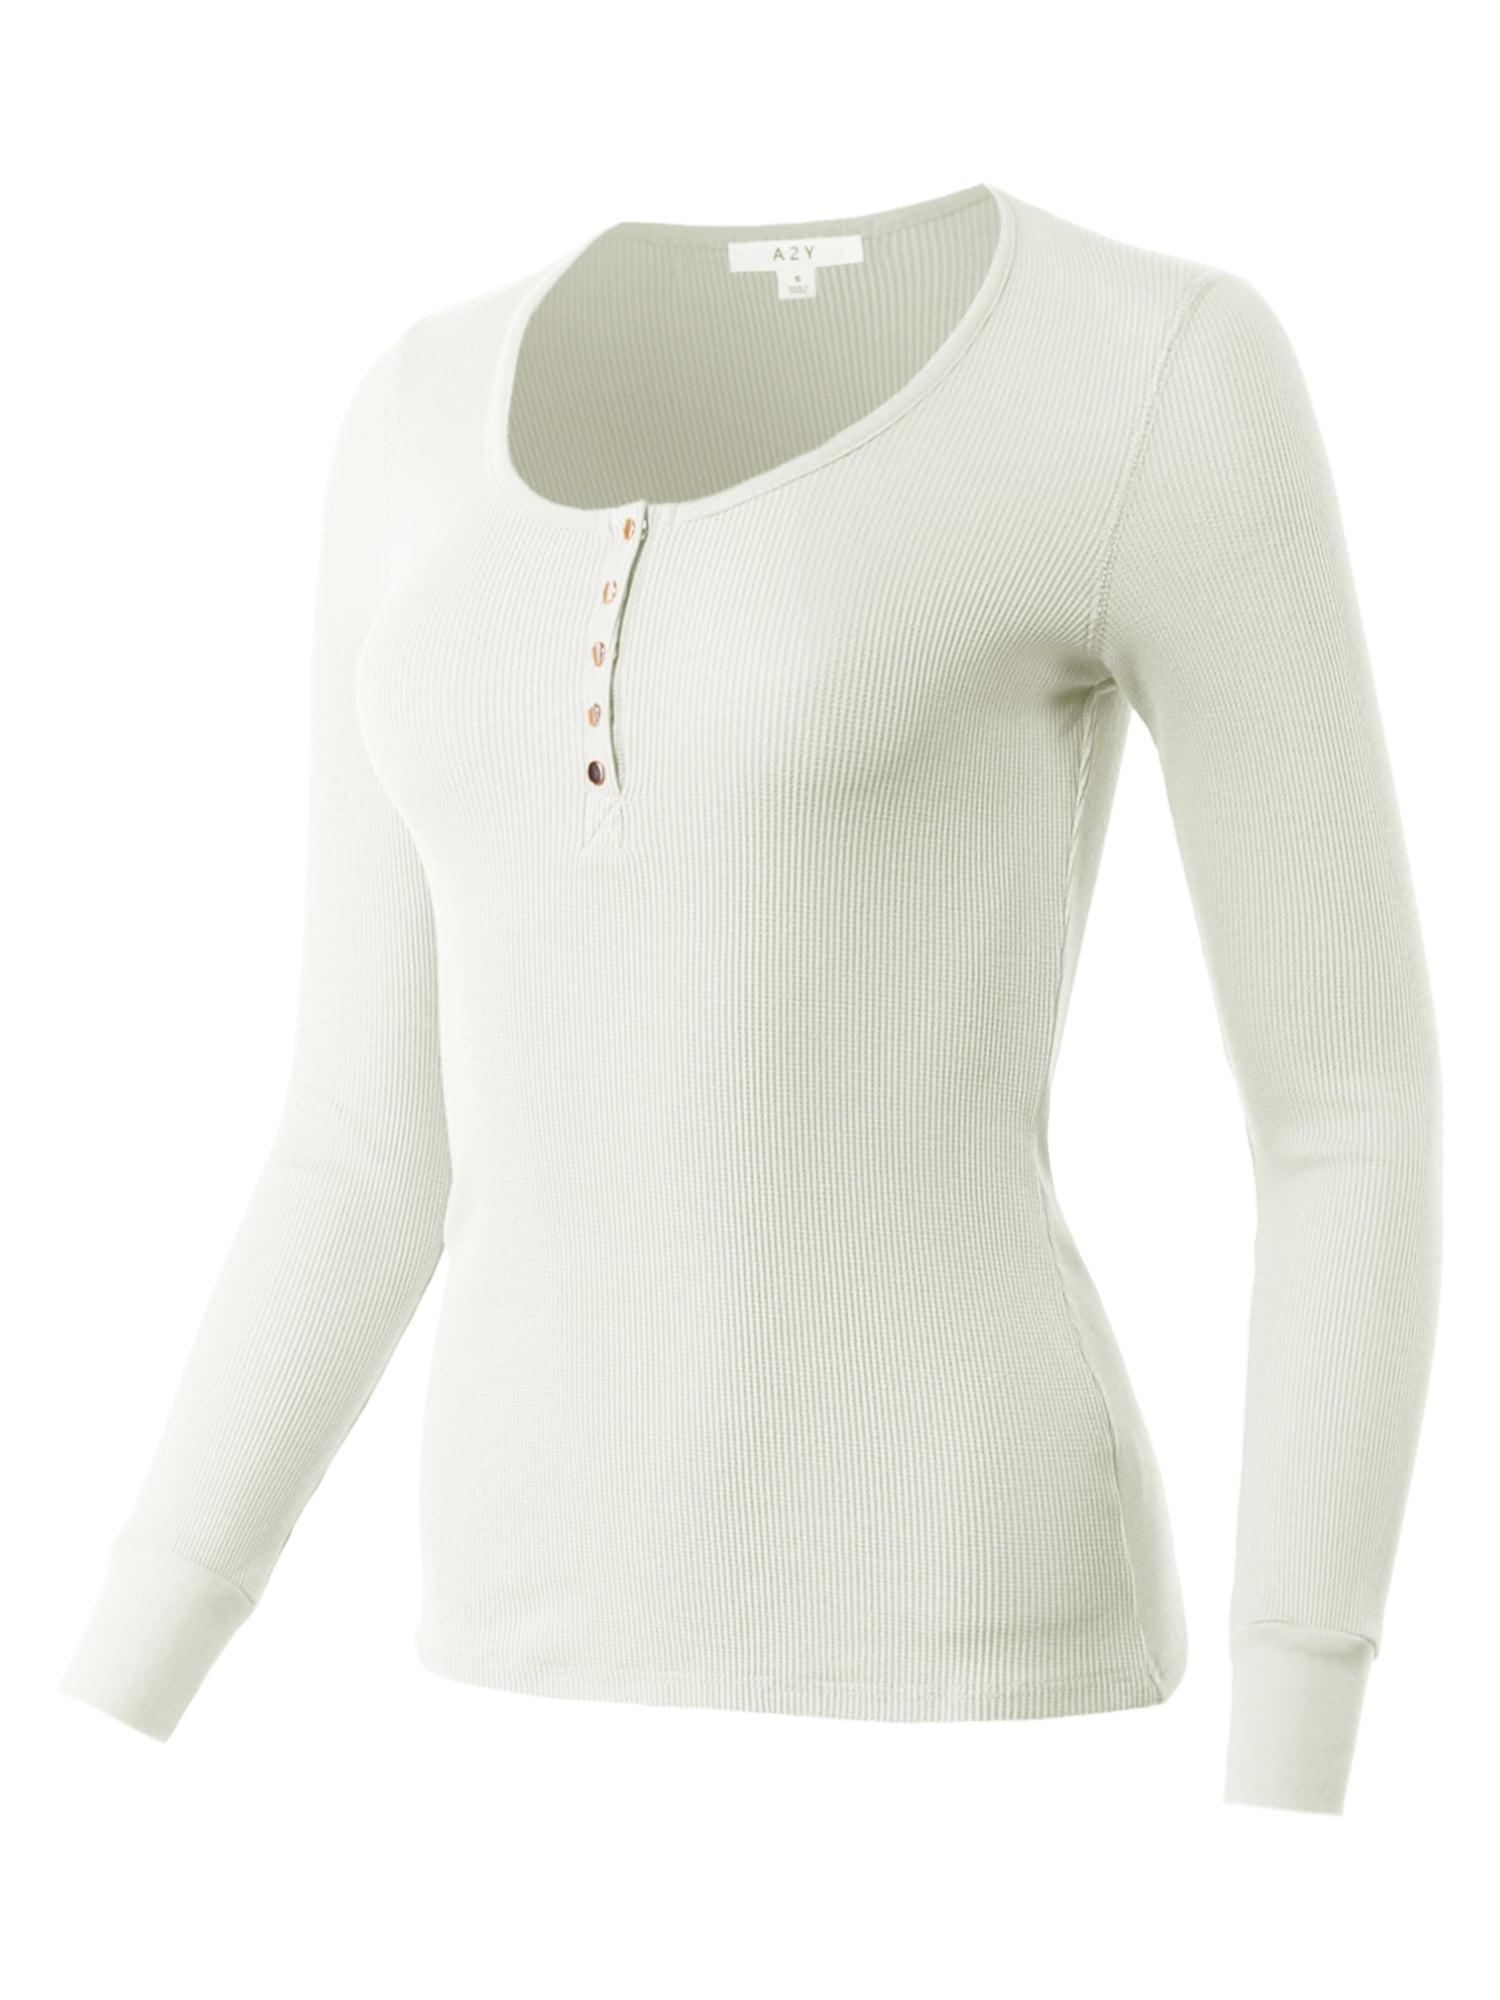 A2Y Women's Fitted Snap Button Henley Crew Neck Long Sleeve Thermal Knit  Tops Heather Grey L 